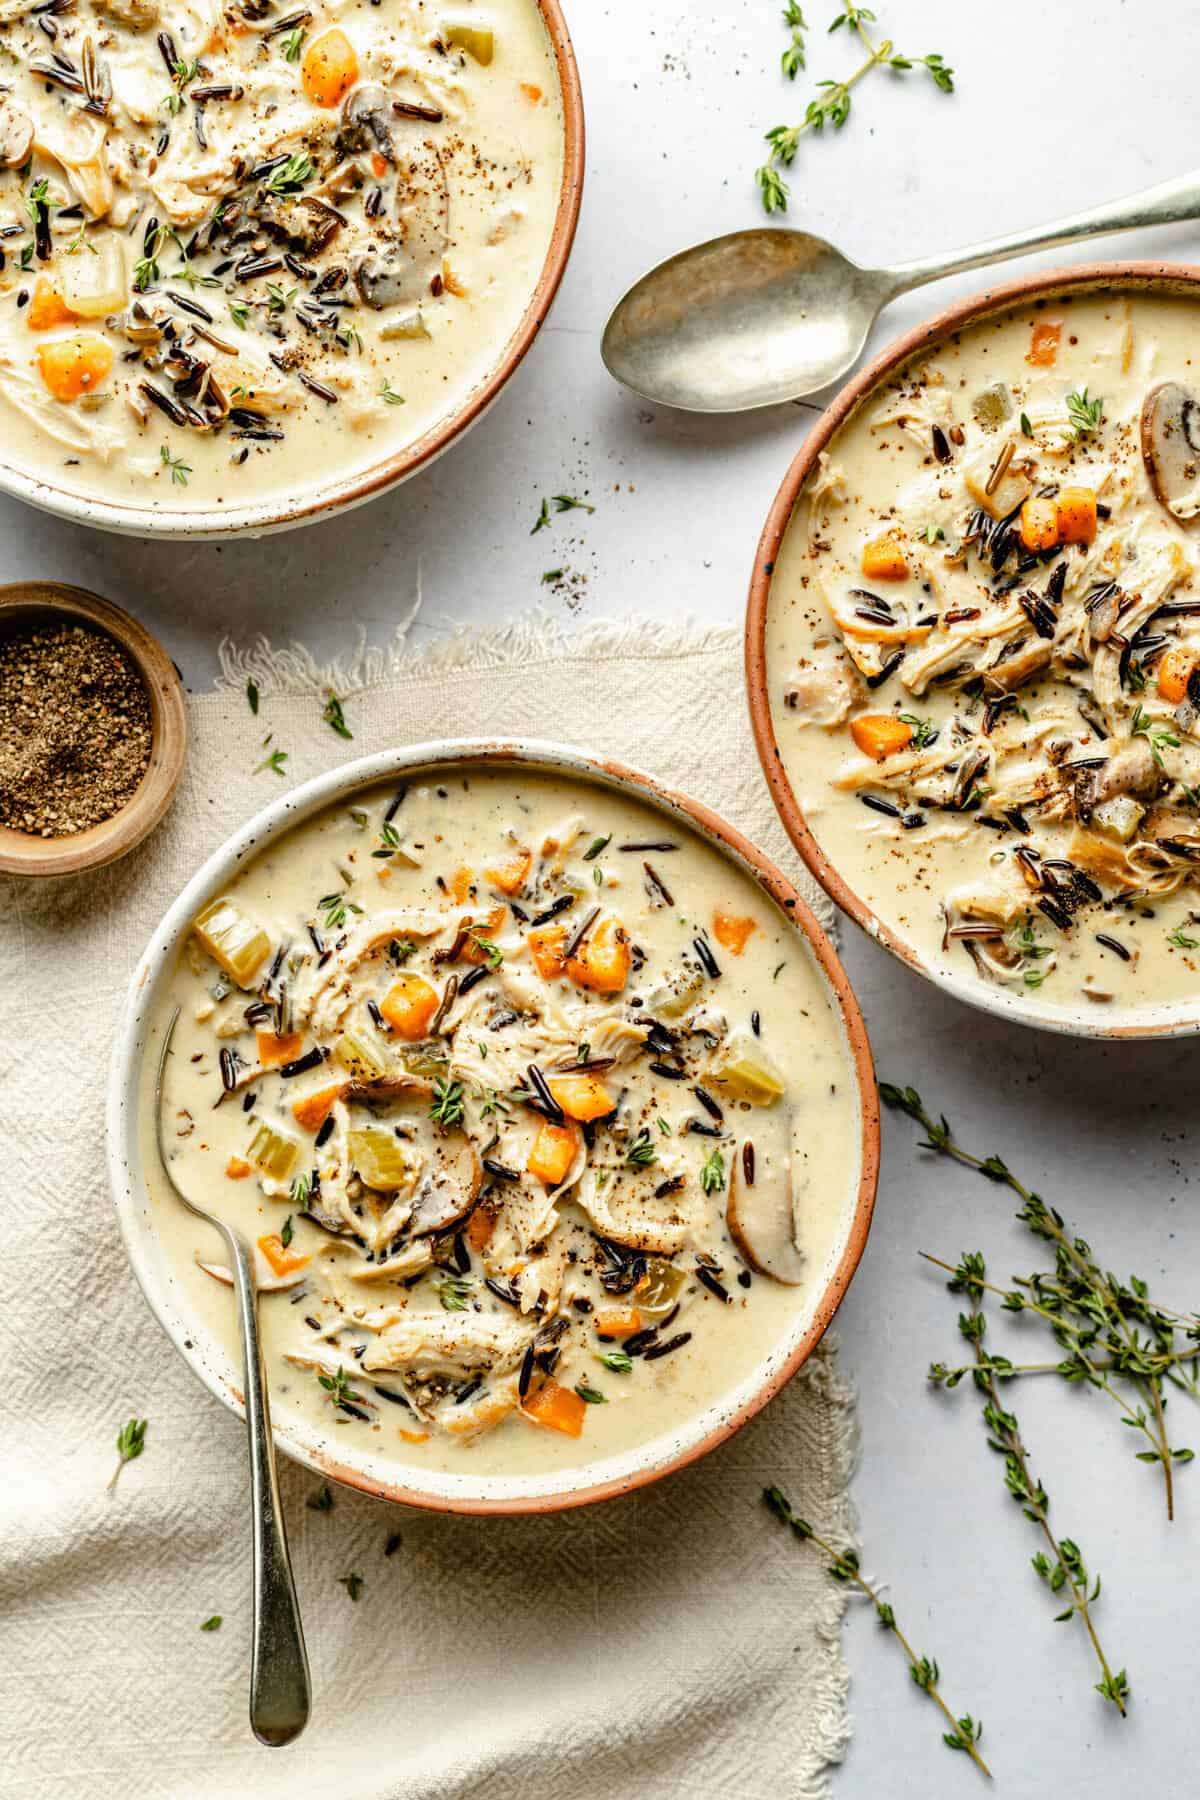 Healthy Chicken and Wild Rice Soup - All the Healthy Things